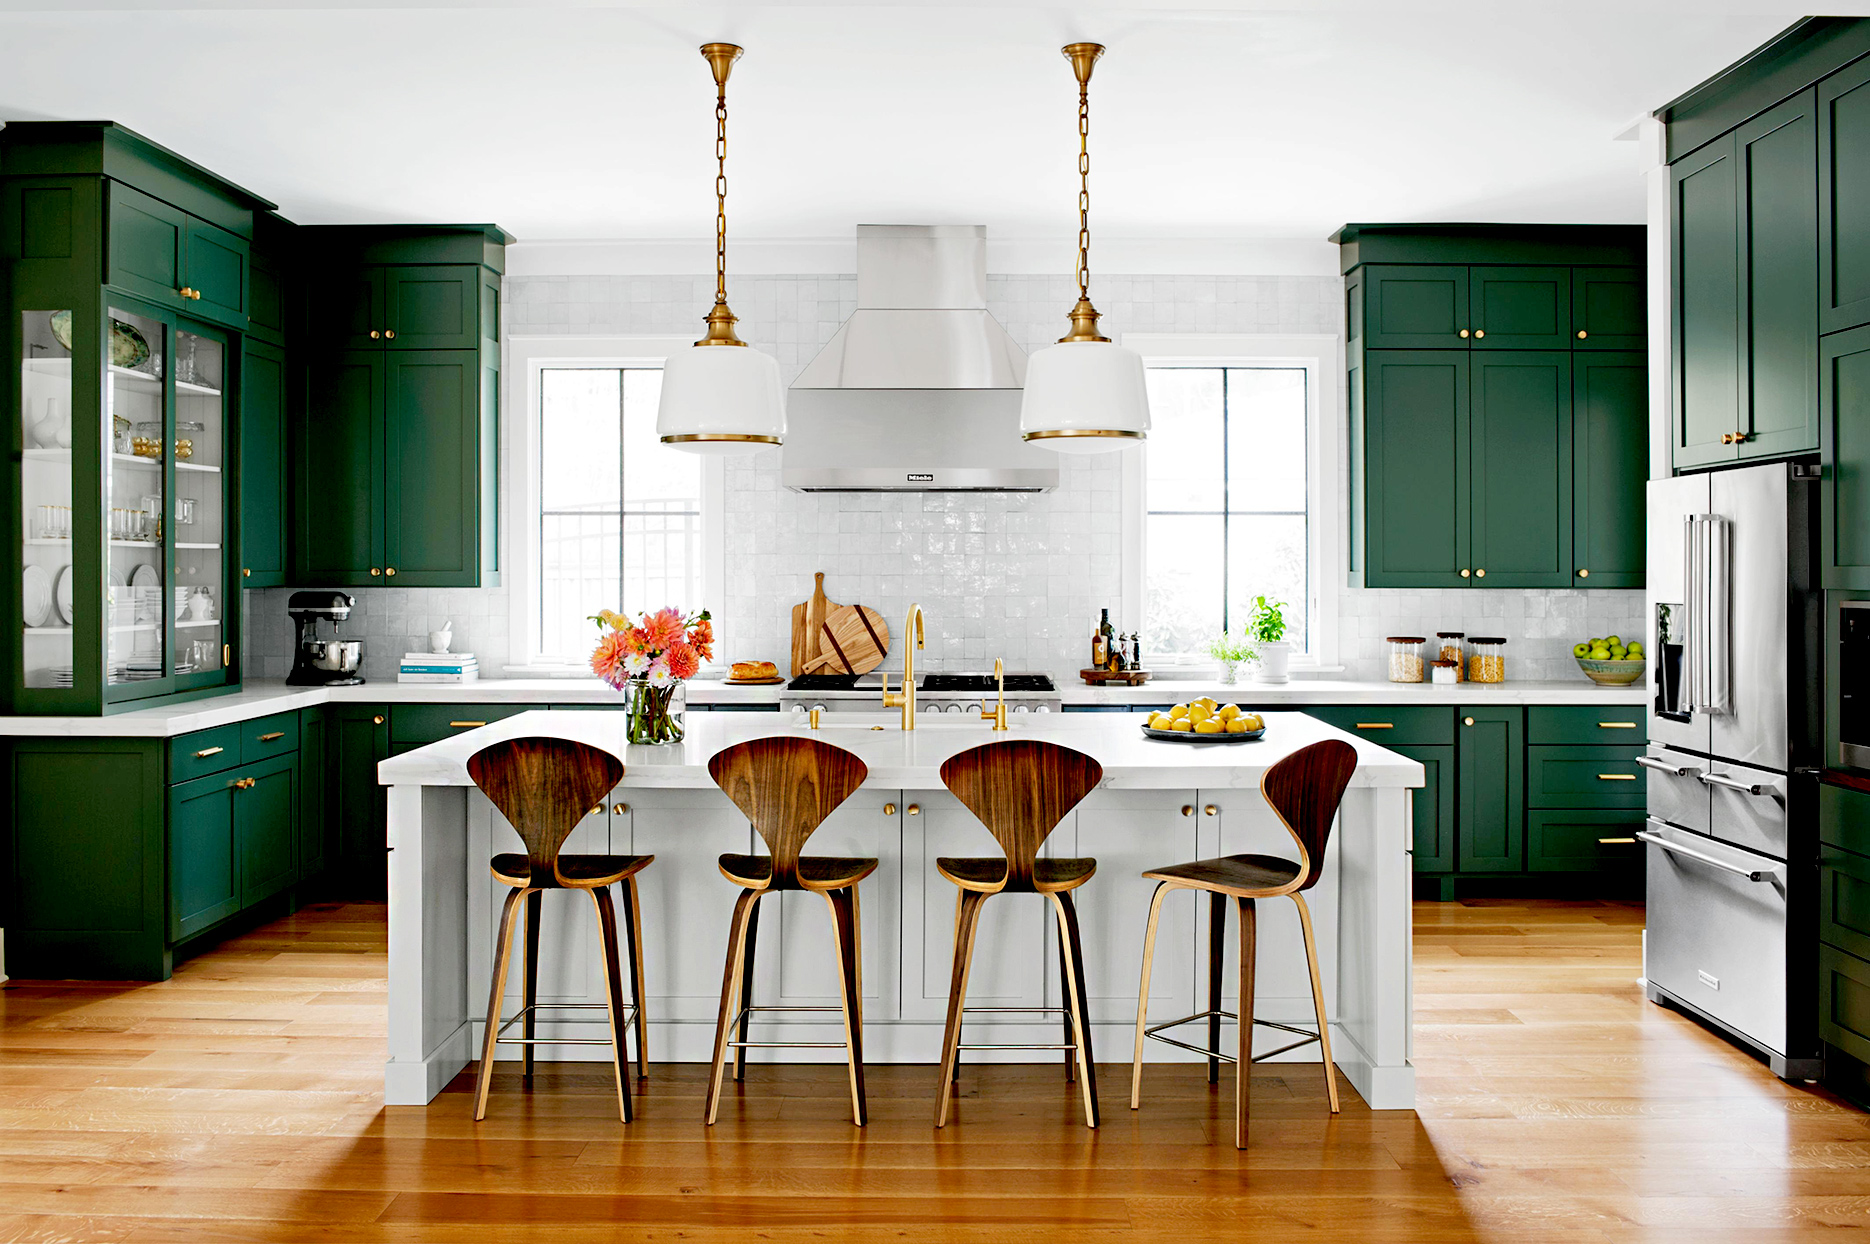 Timeless Kitchen Trends That Are Here to Stay | Better Homes & Gardens